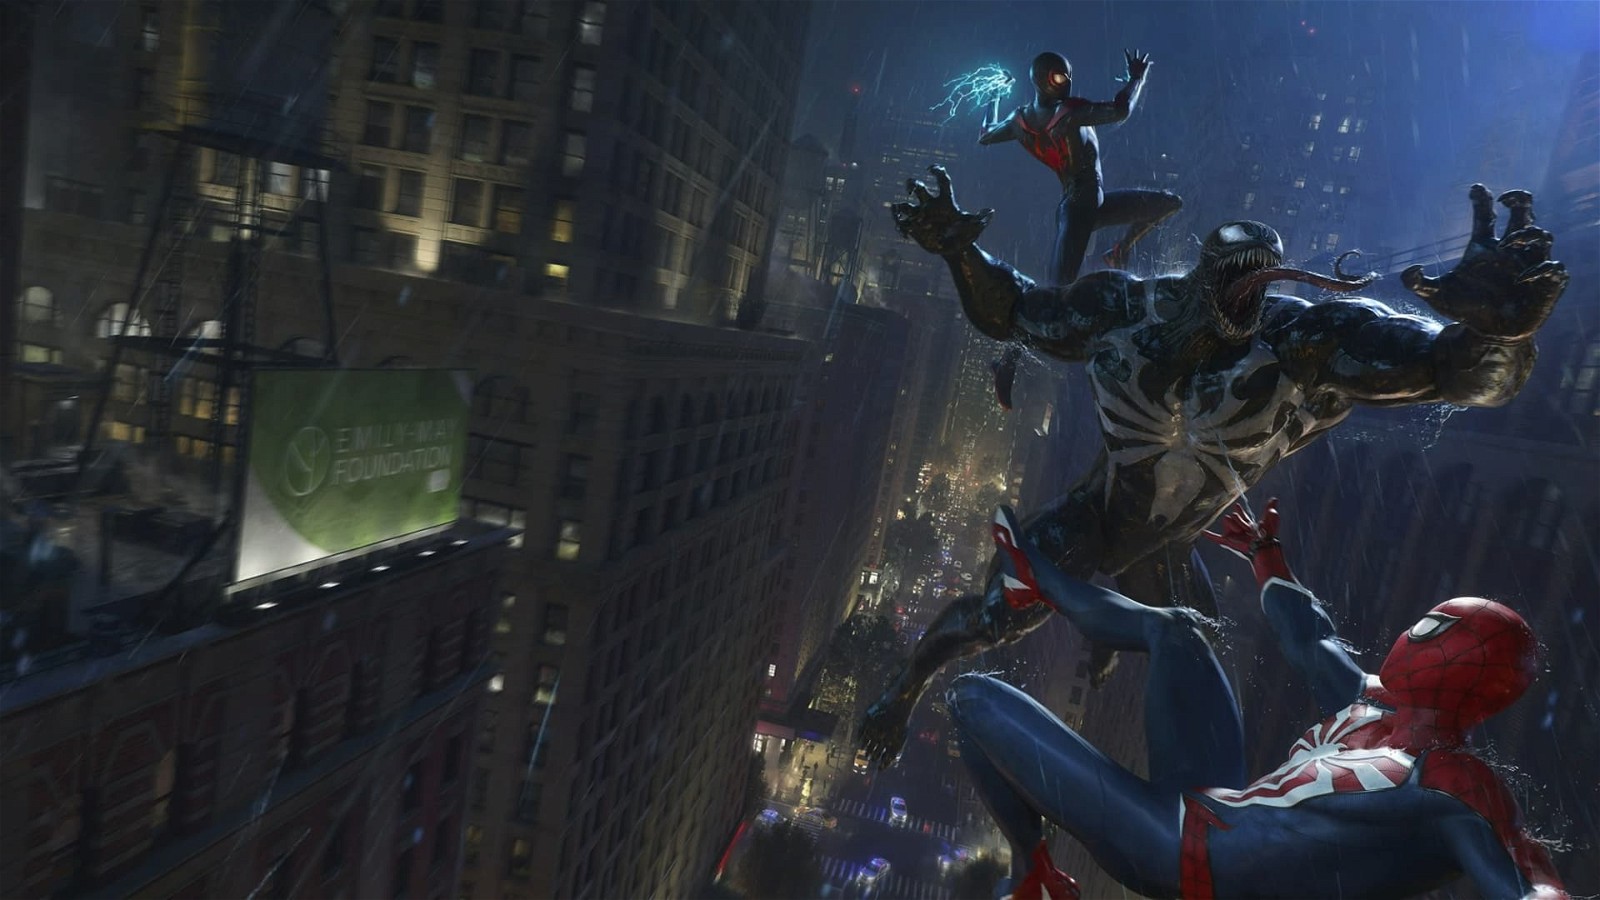 Marvel's Spider-Man 2 PC Requirements: Minimum And Recommended